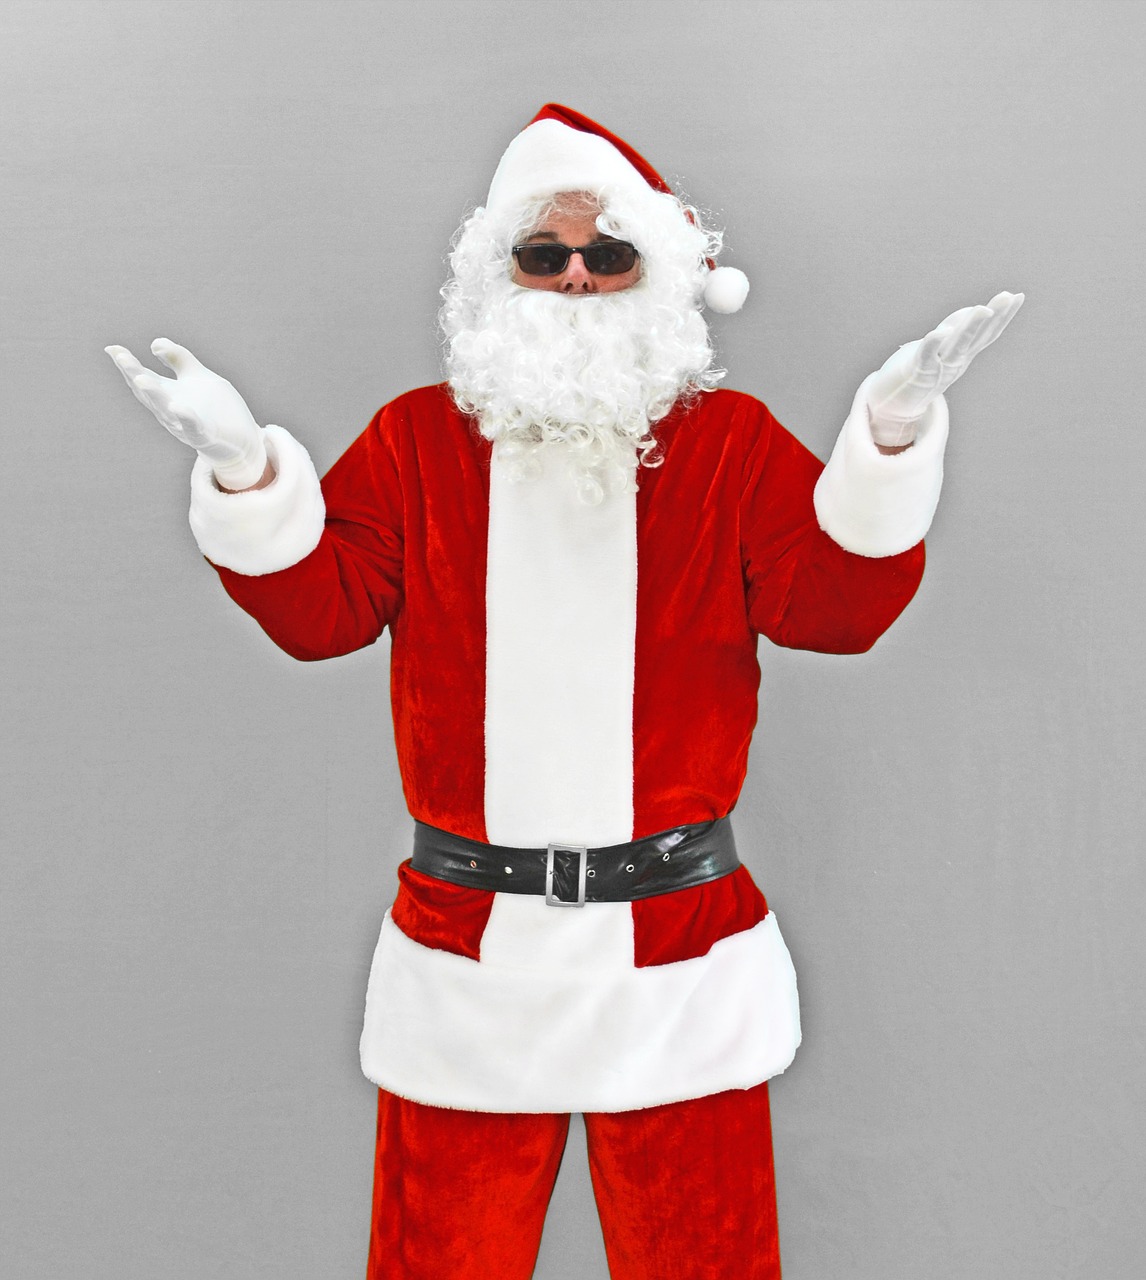 a man dressed as santa claus poses for a picture, a photo, istockphoto, neoprene, 3/4 front view, hands